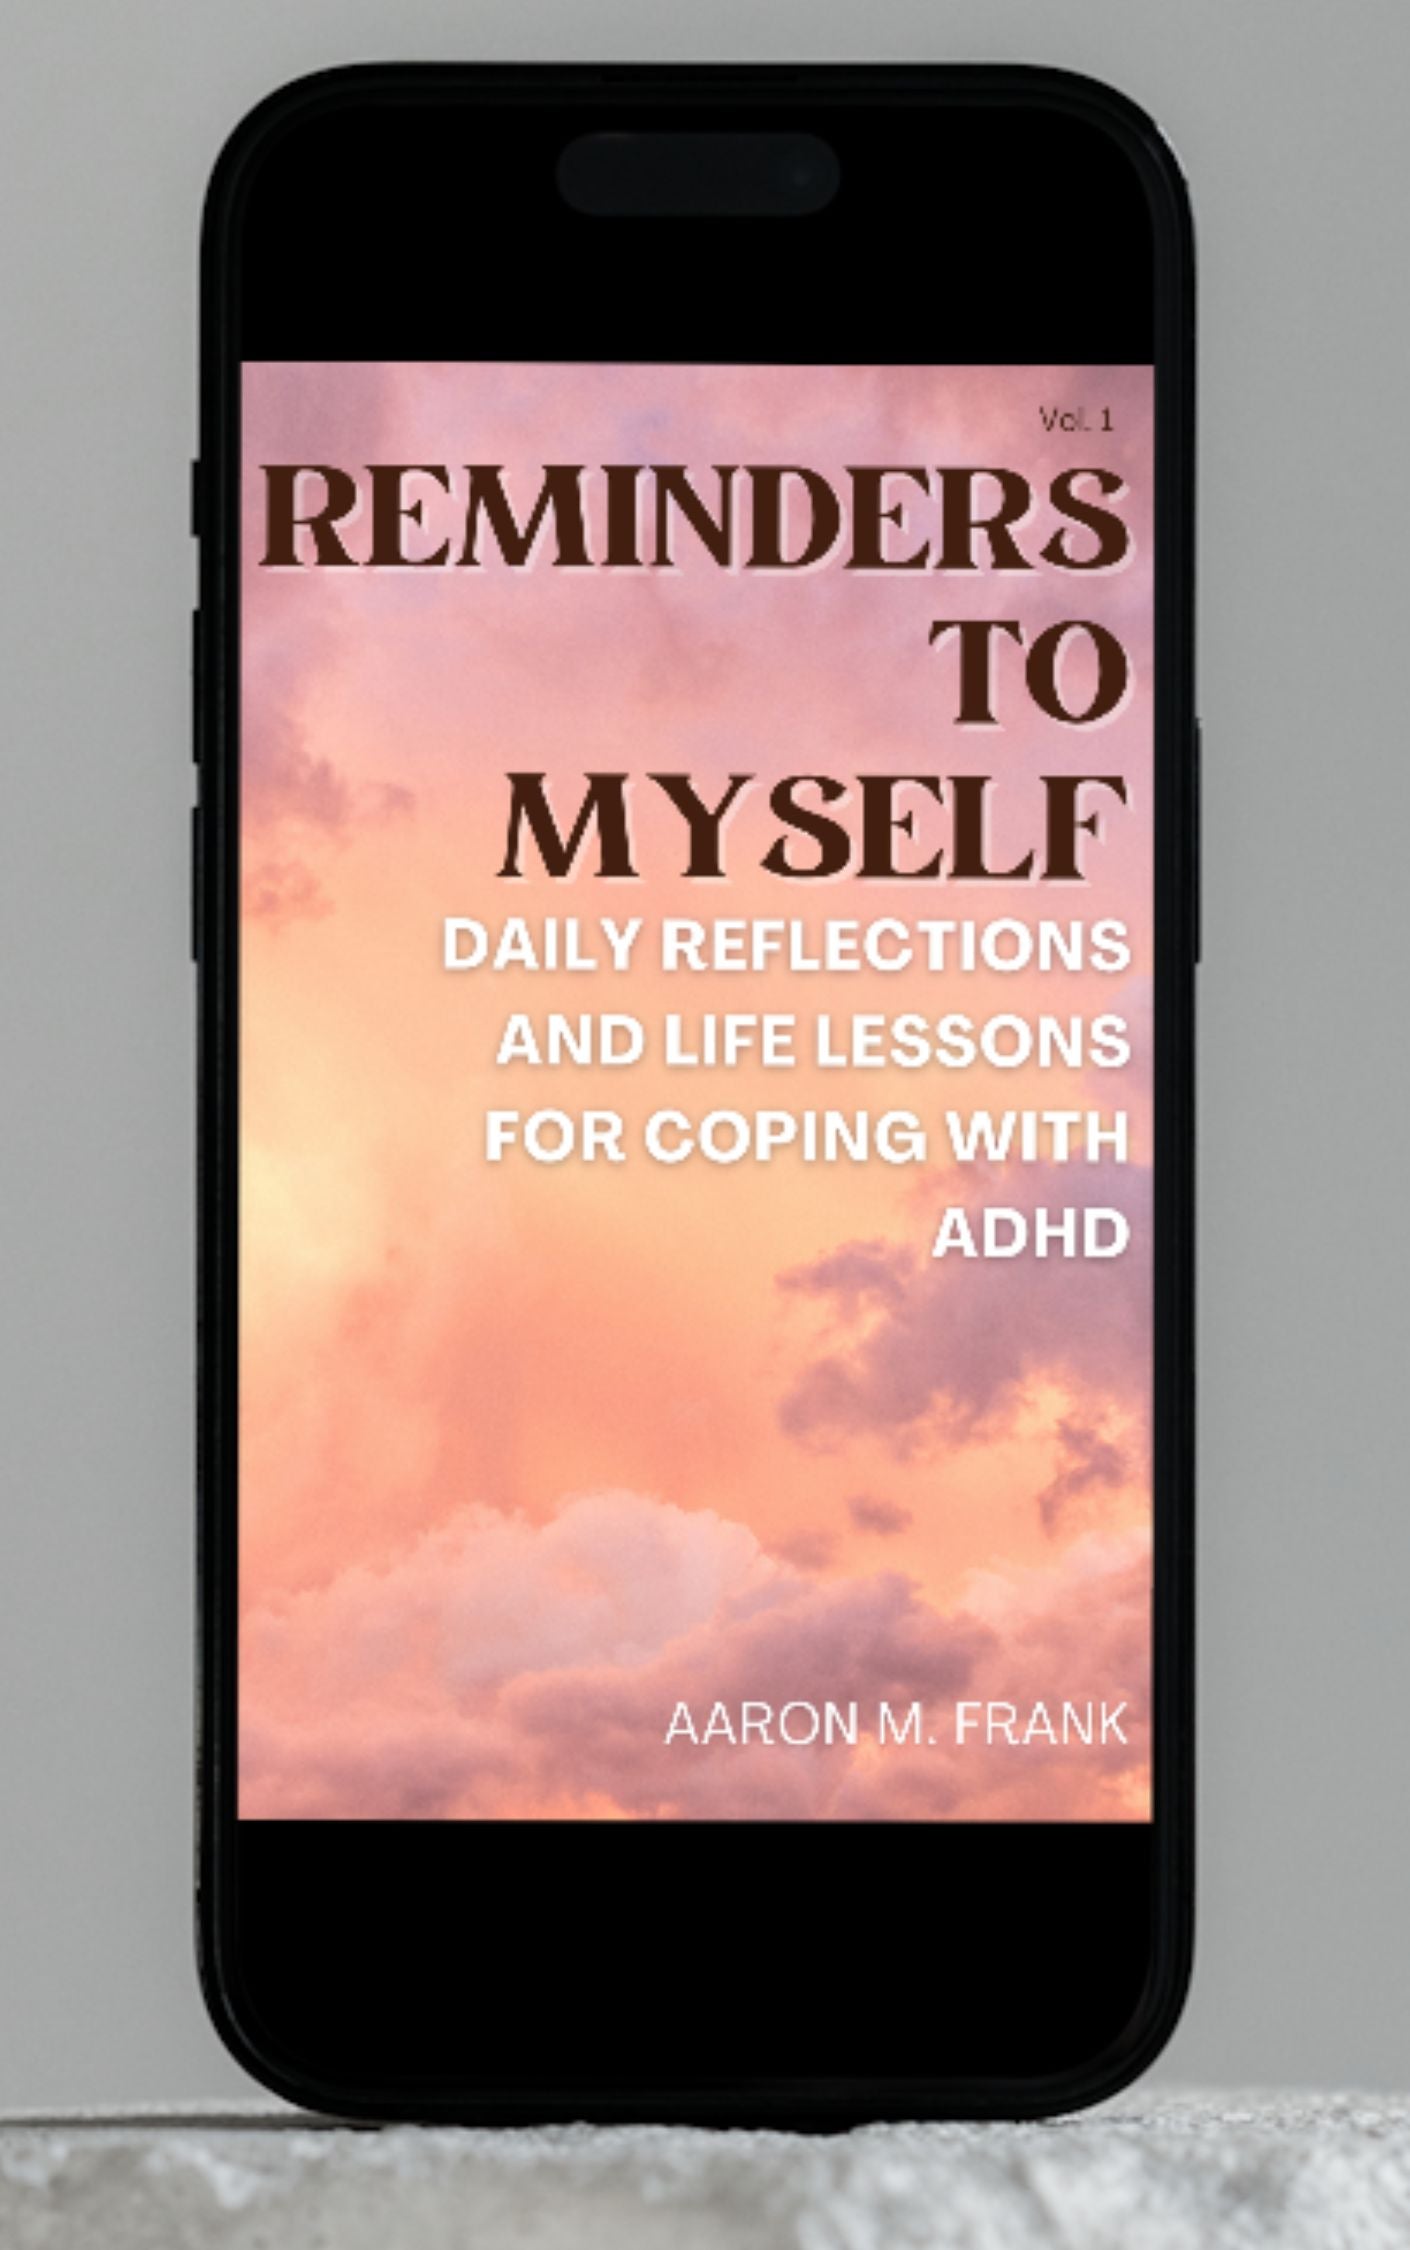 Reminders to Myself: Daily Reflections and Life Lessons for Coping with ADHD Volume 1